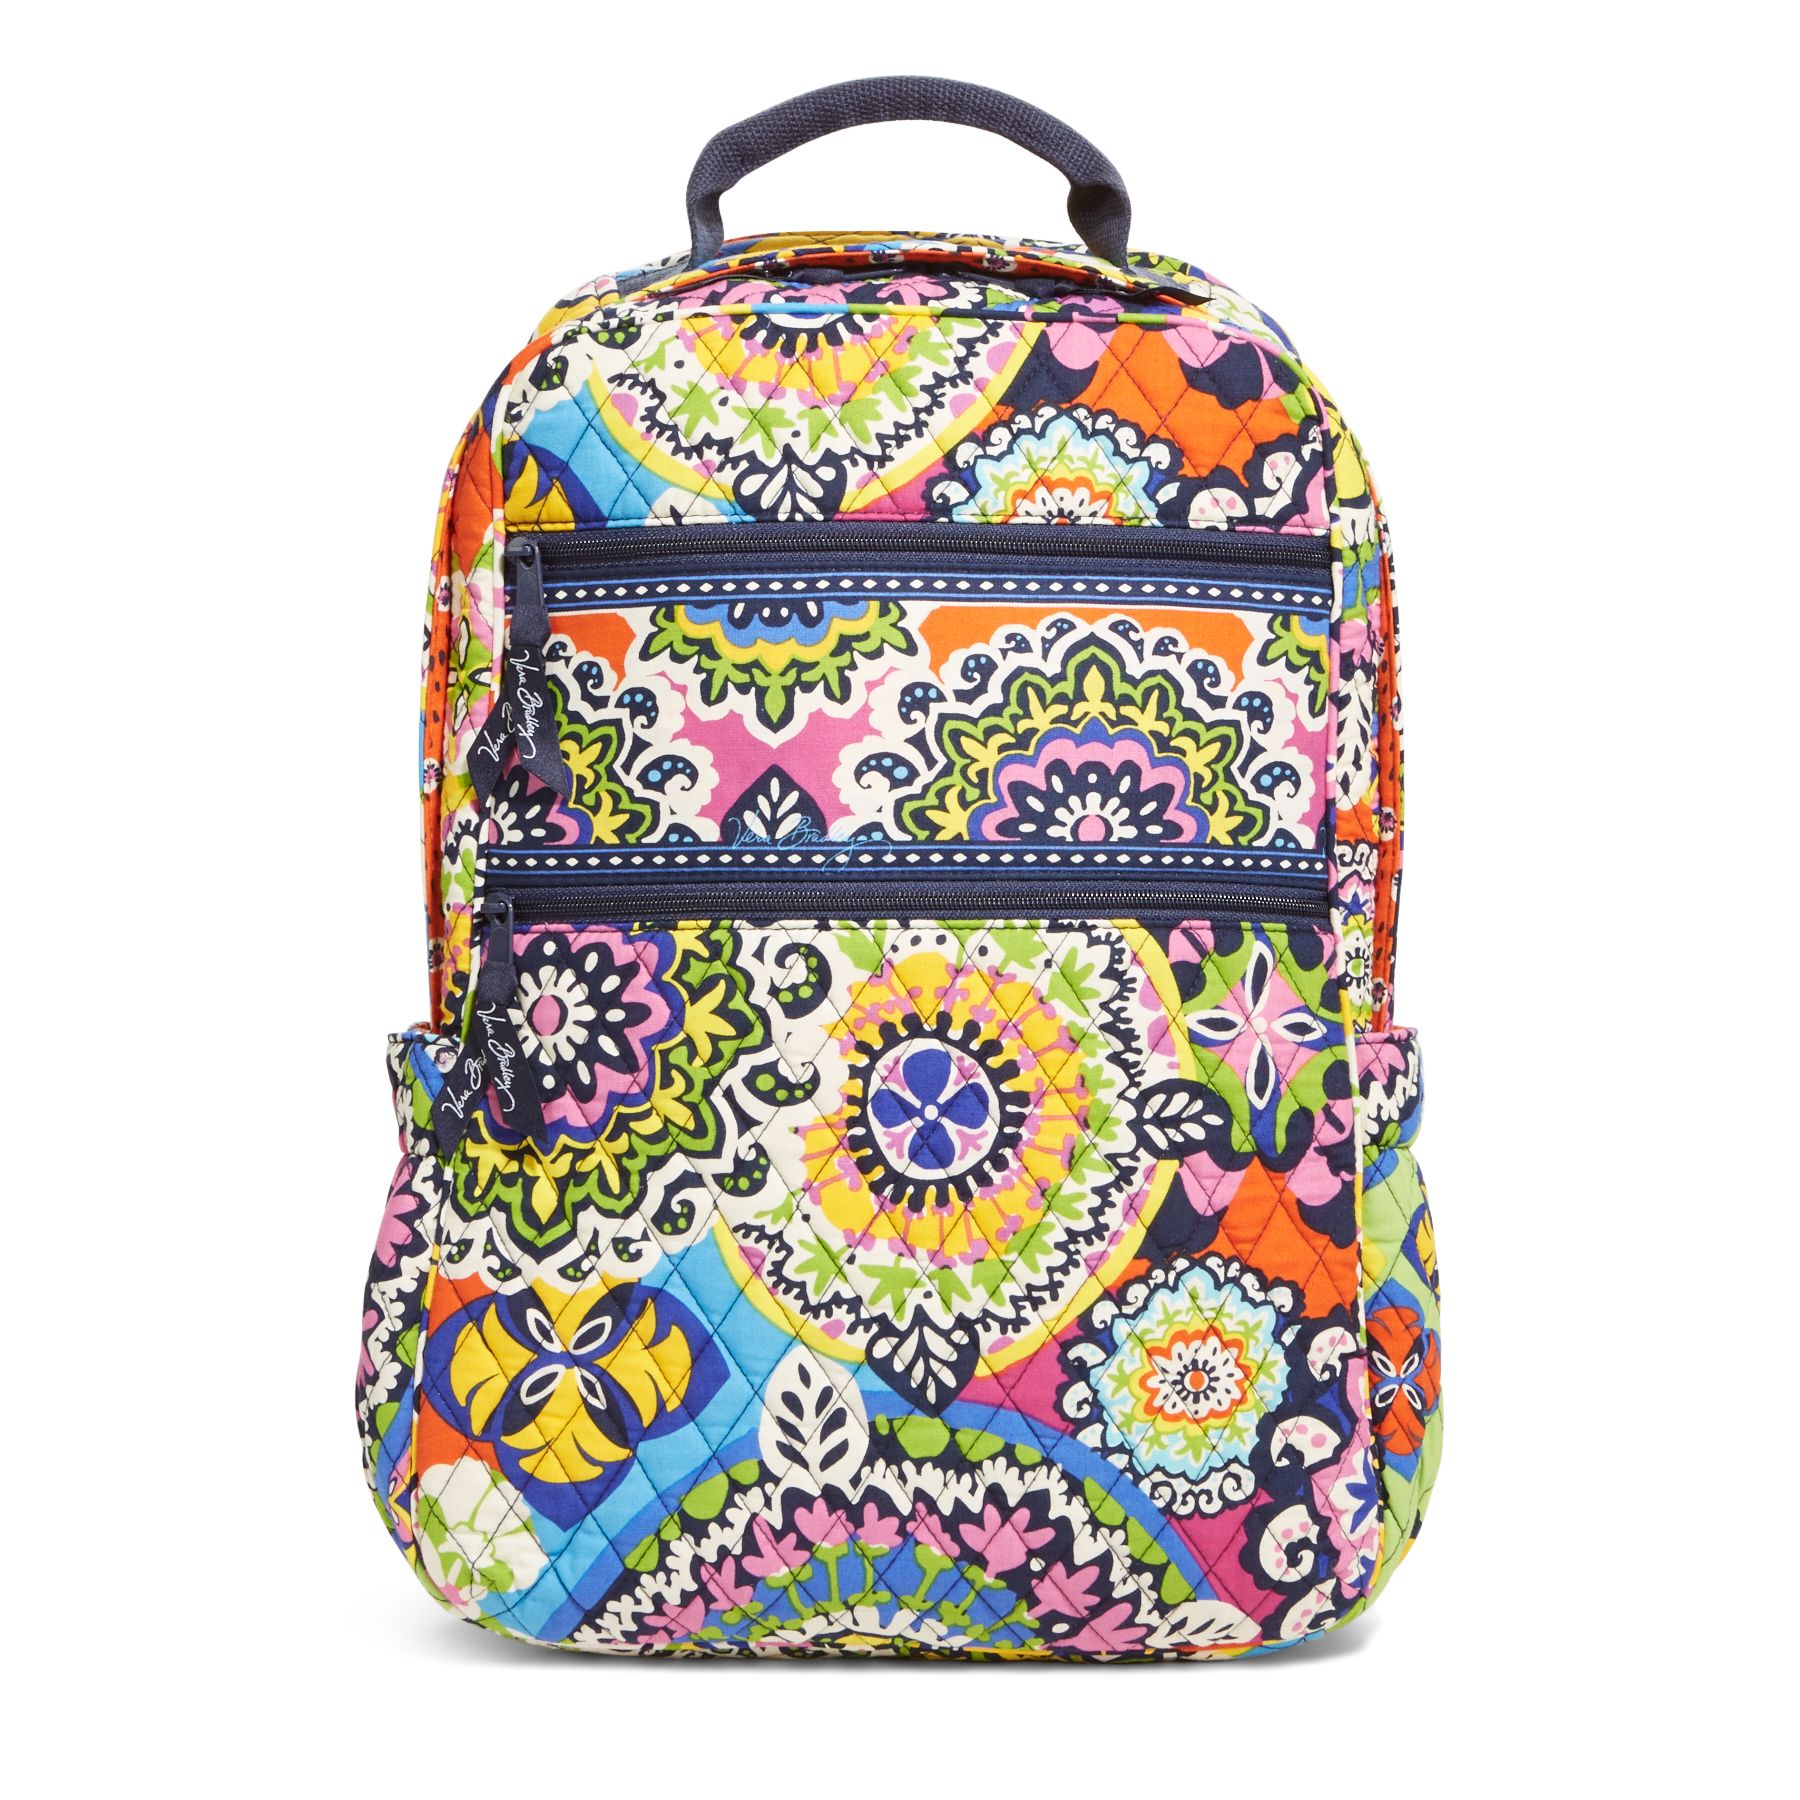 TODAY ONLY! Vera Bradley Blow out! Extra 30 off Sale Items!